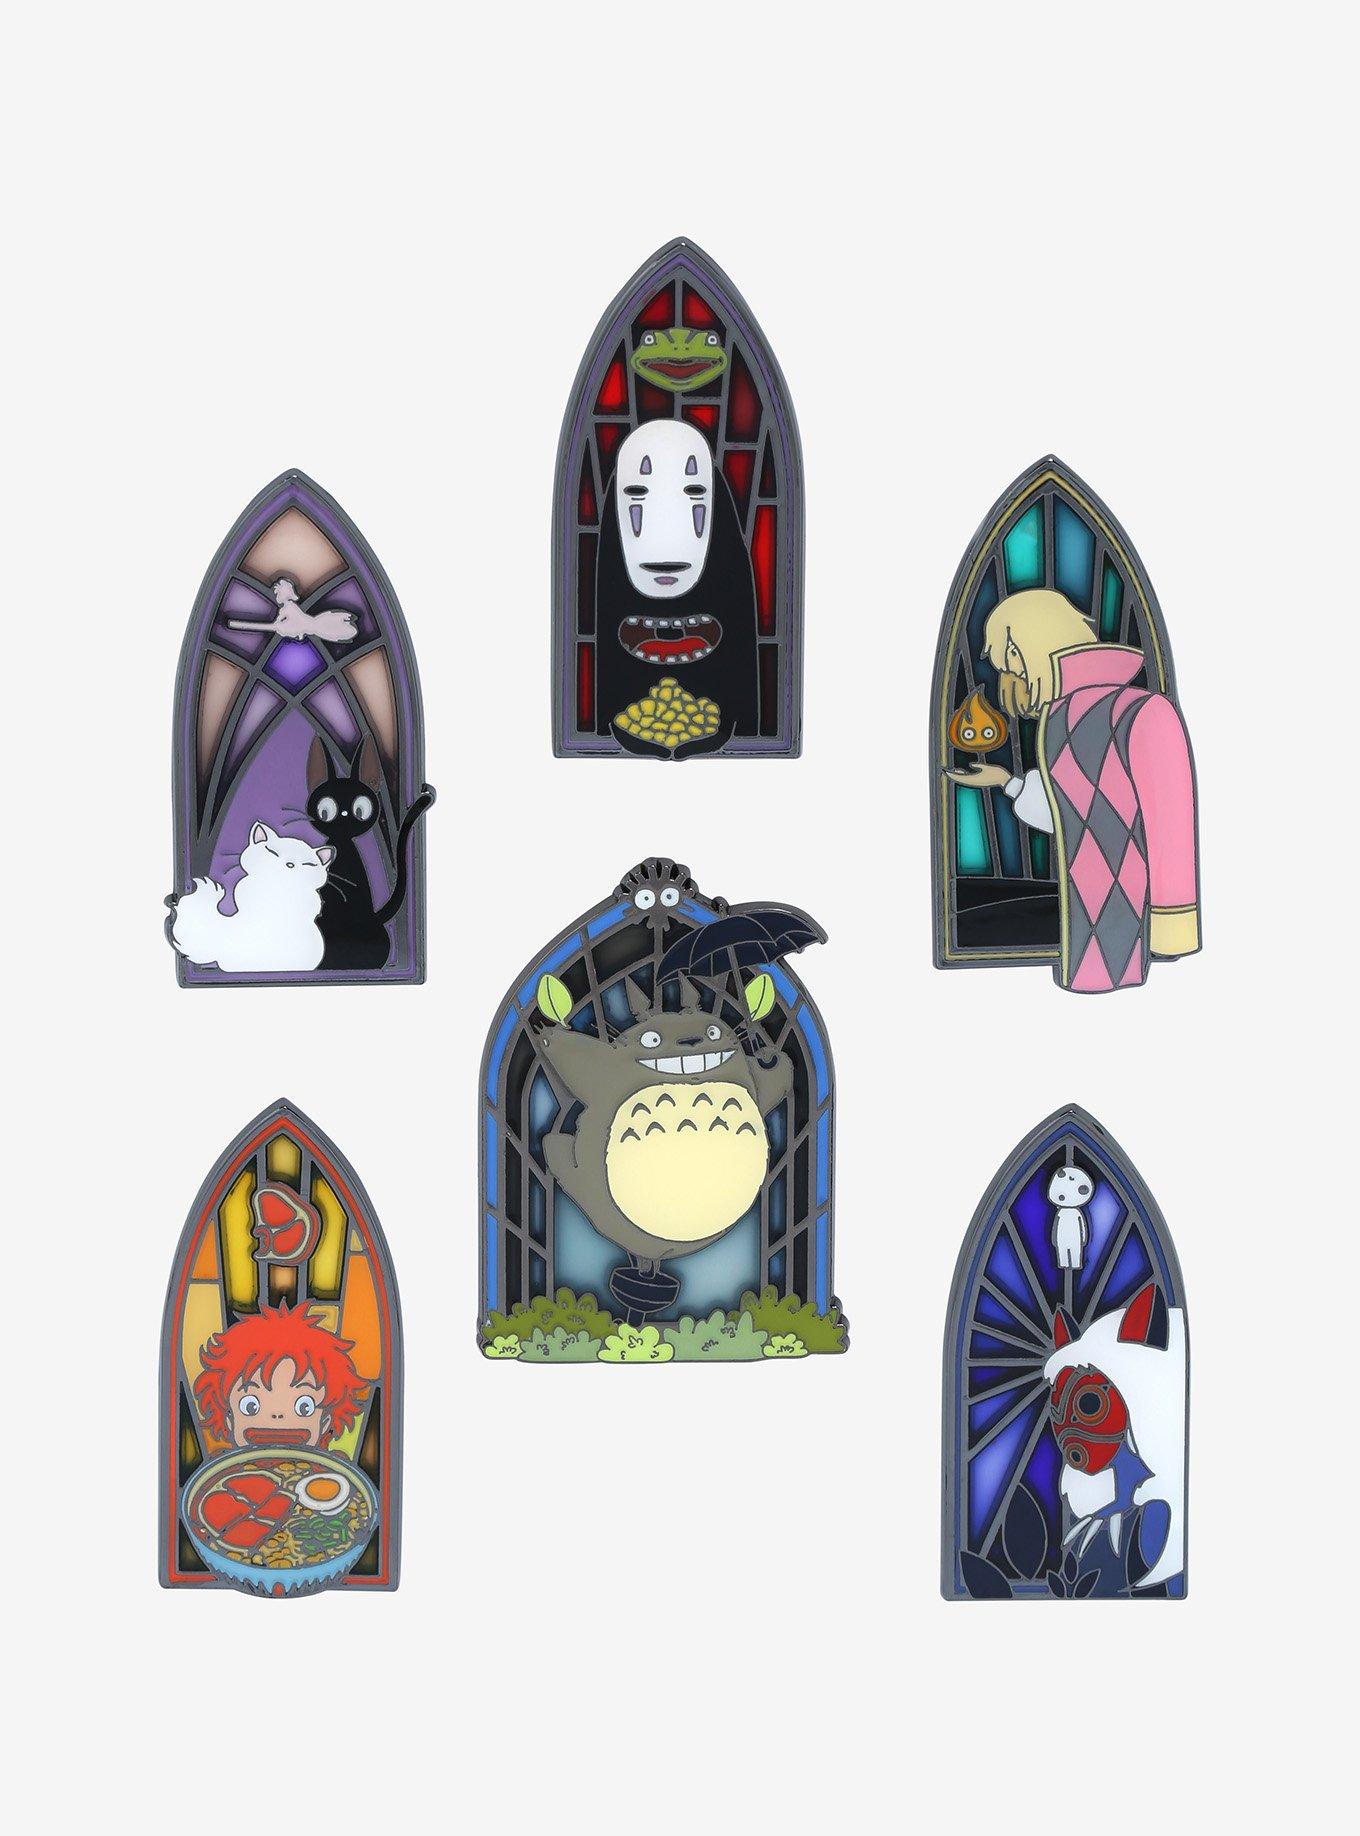 Millennia on X: Studio ghibli merch now in stock at our Westfield